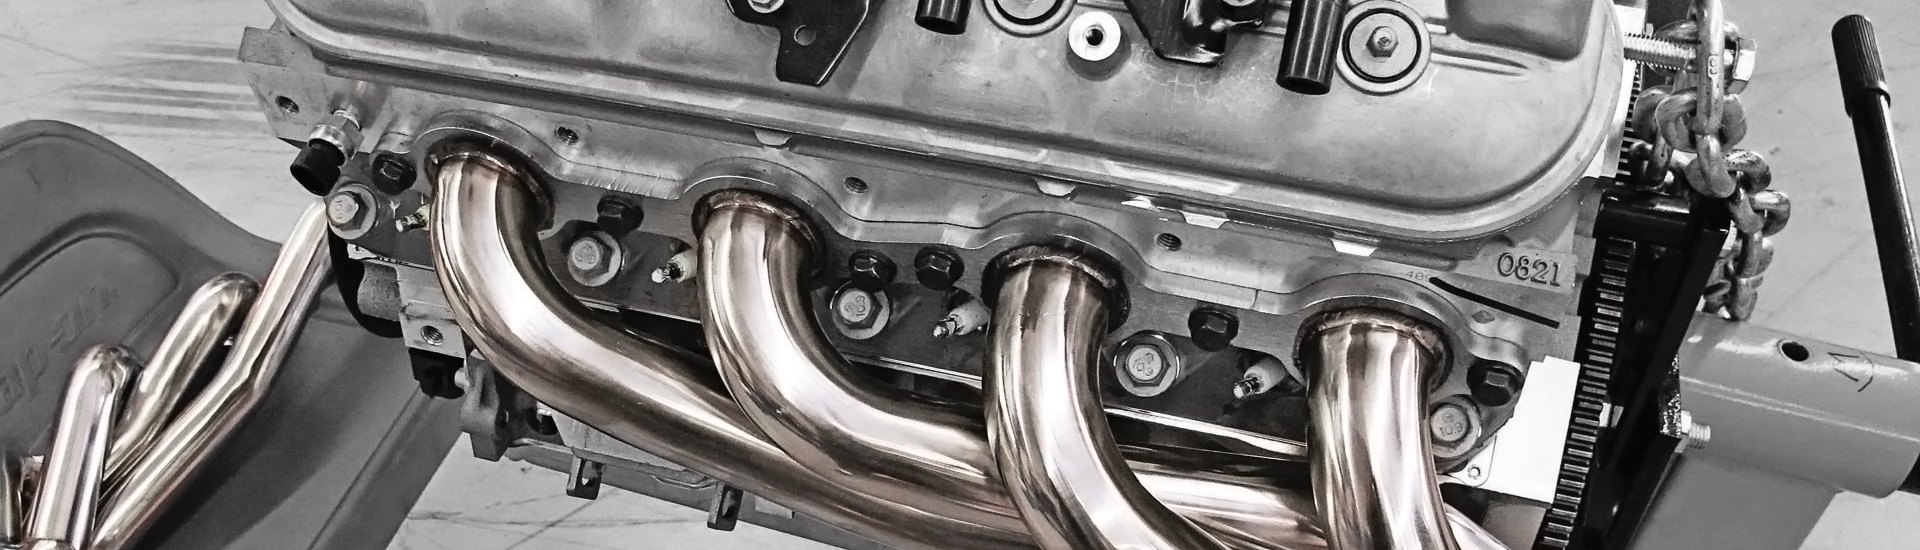 Are Headers Worth the Performance Improvement?